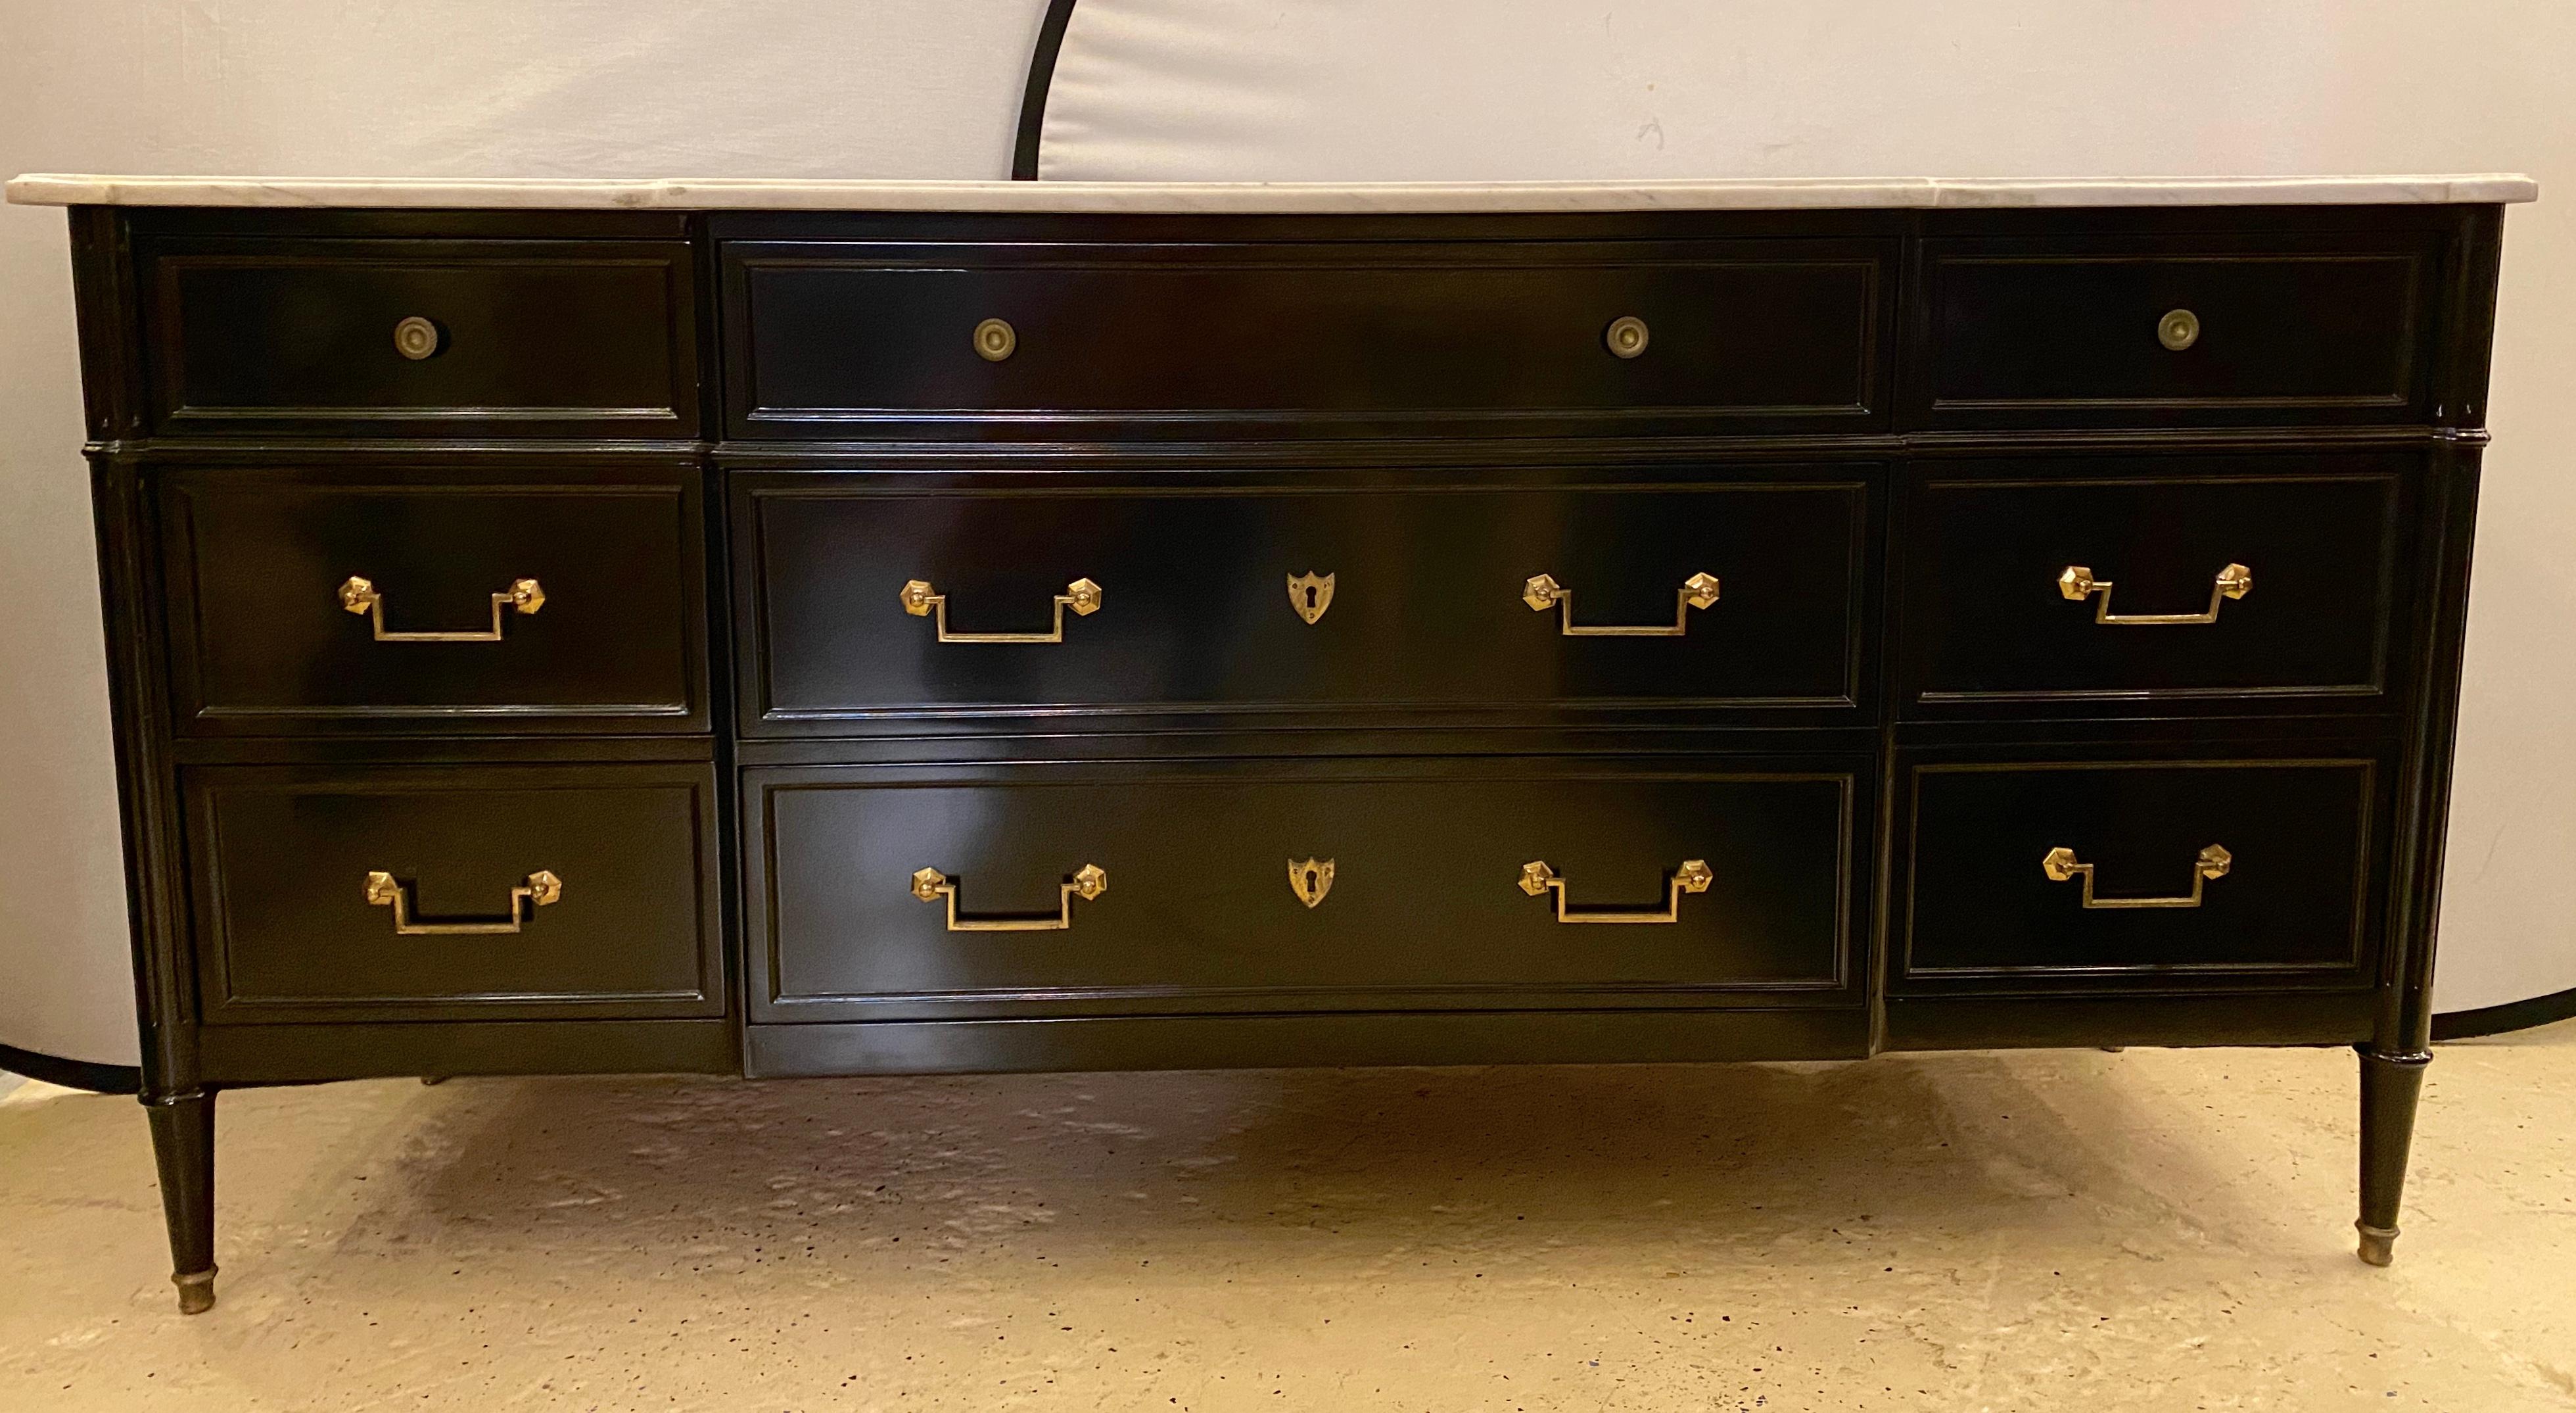 Finest Hollywood Regency dresser or commode with a white marble top in the Maison Jansen style having a spectacular Steinway piano black lacquered finish. The three boxed center large drawers flanked by sets of three smaller drawers all having the